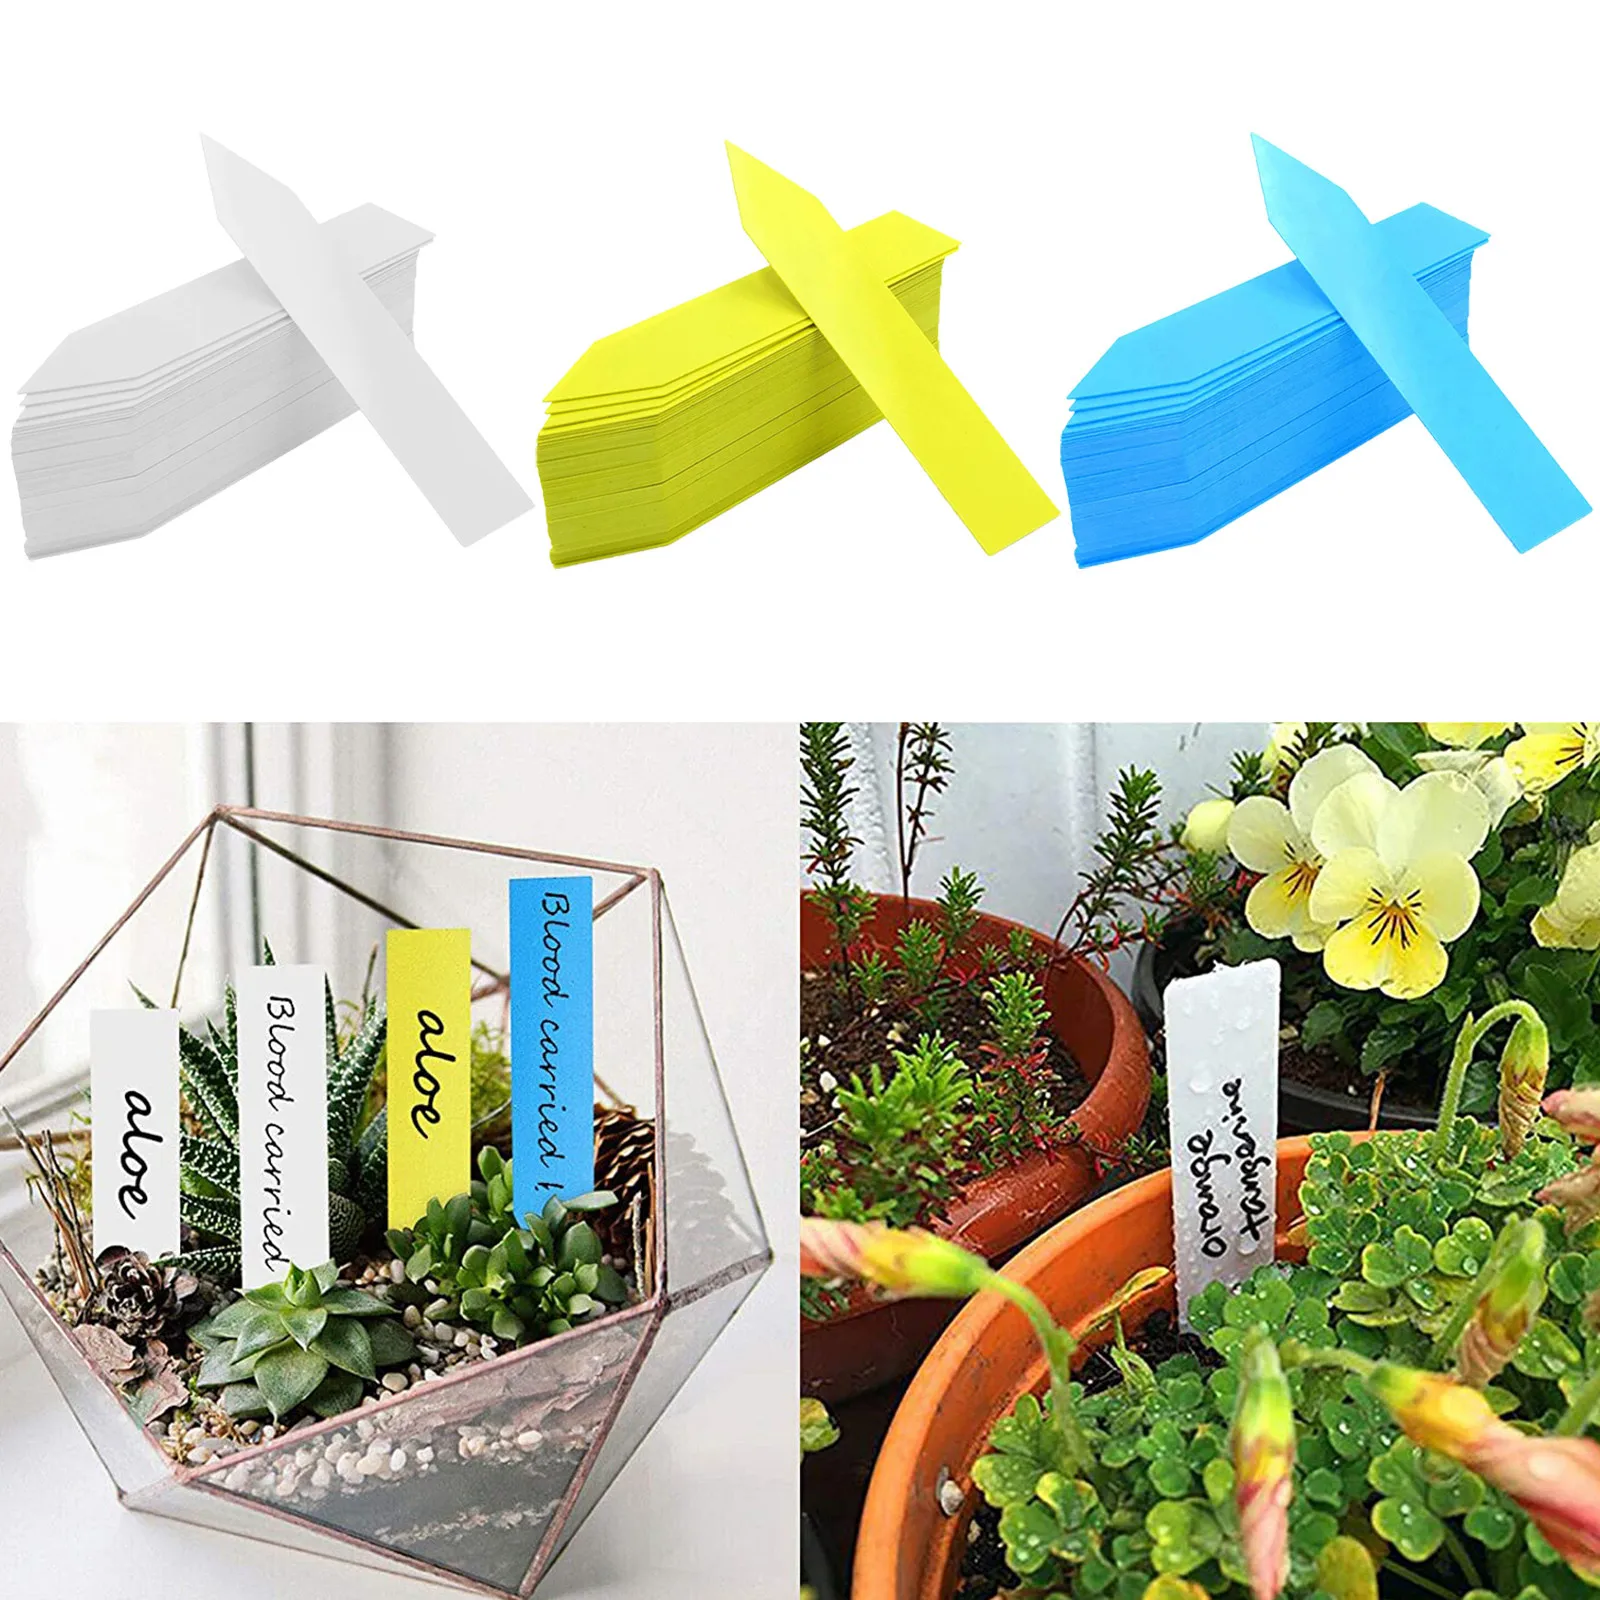 

100 Pcs Plastic Plant Seed Labels Pot Marker Nursery Garden Stake Tags Flower Label 10x2cm Plant Name Marking Garden Supplies